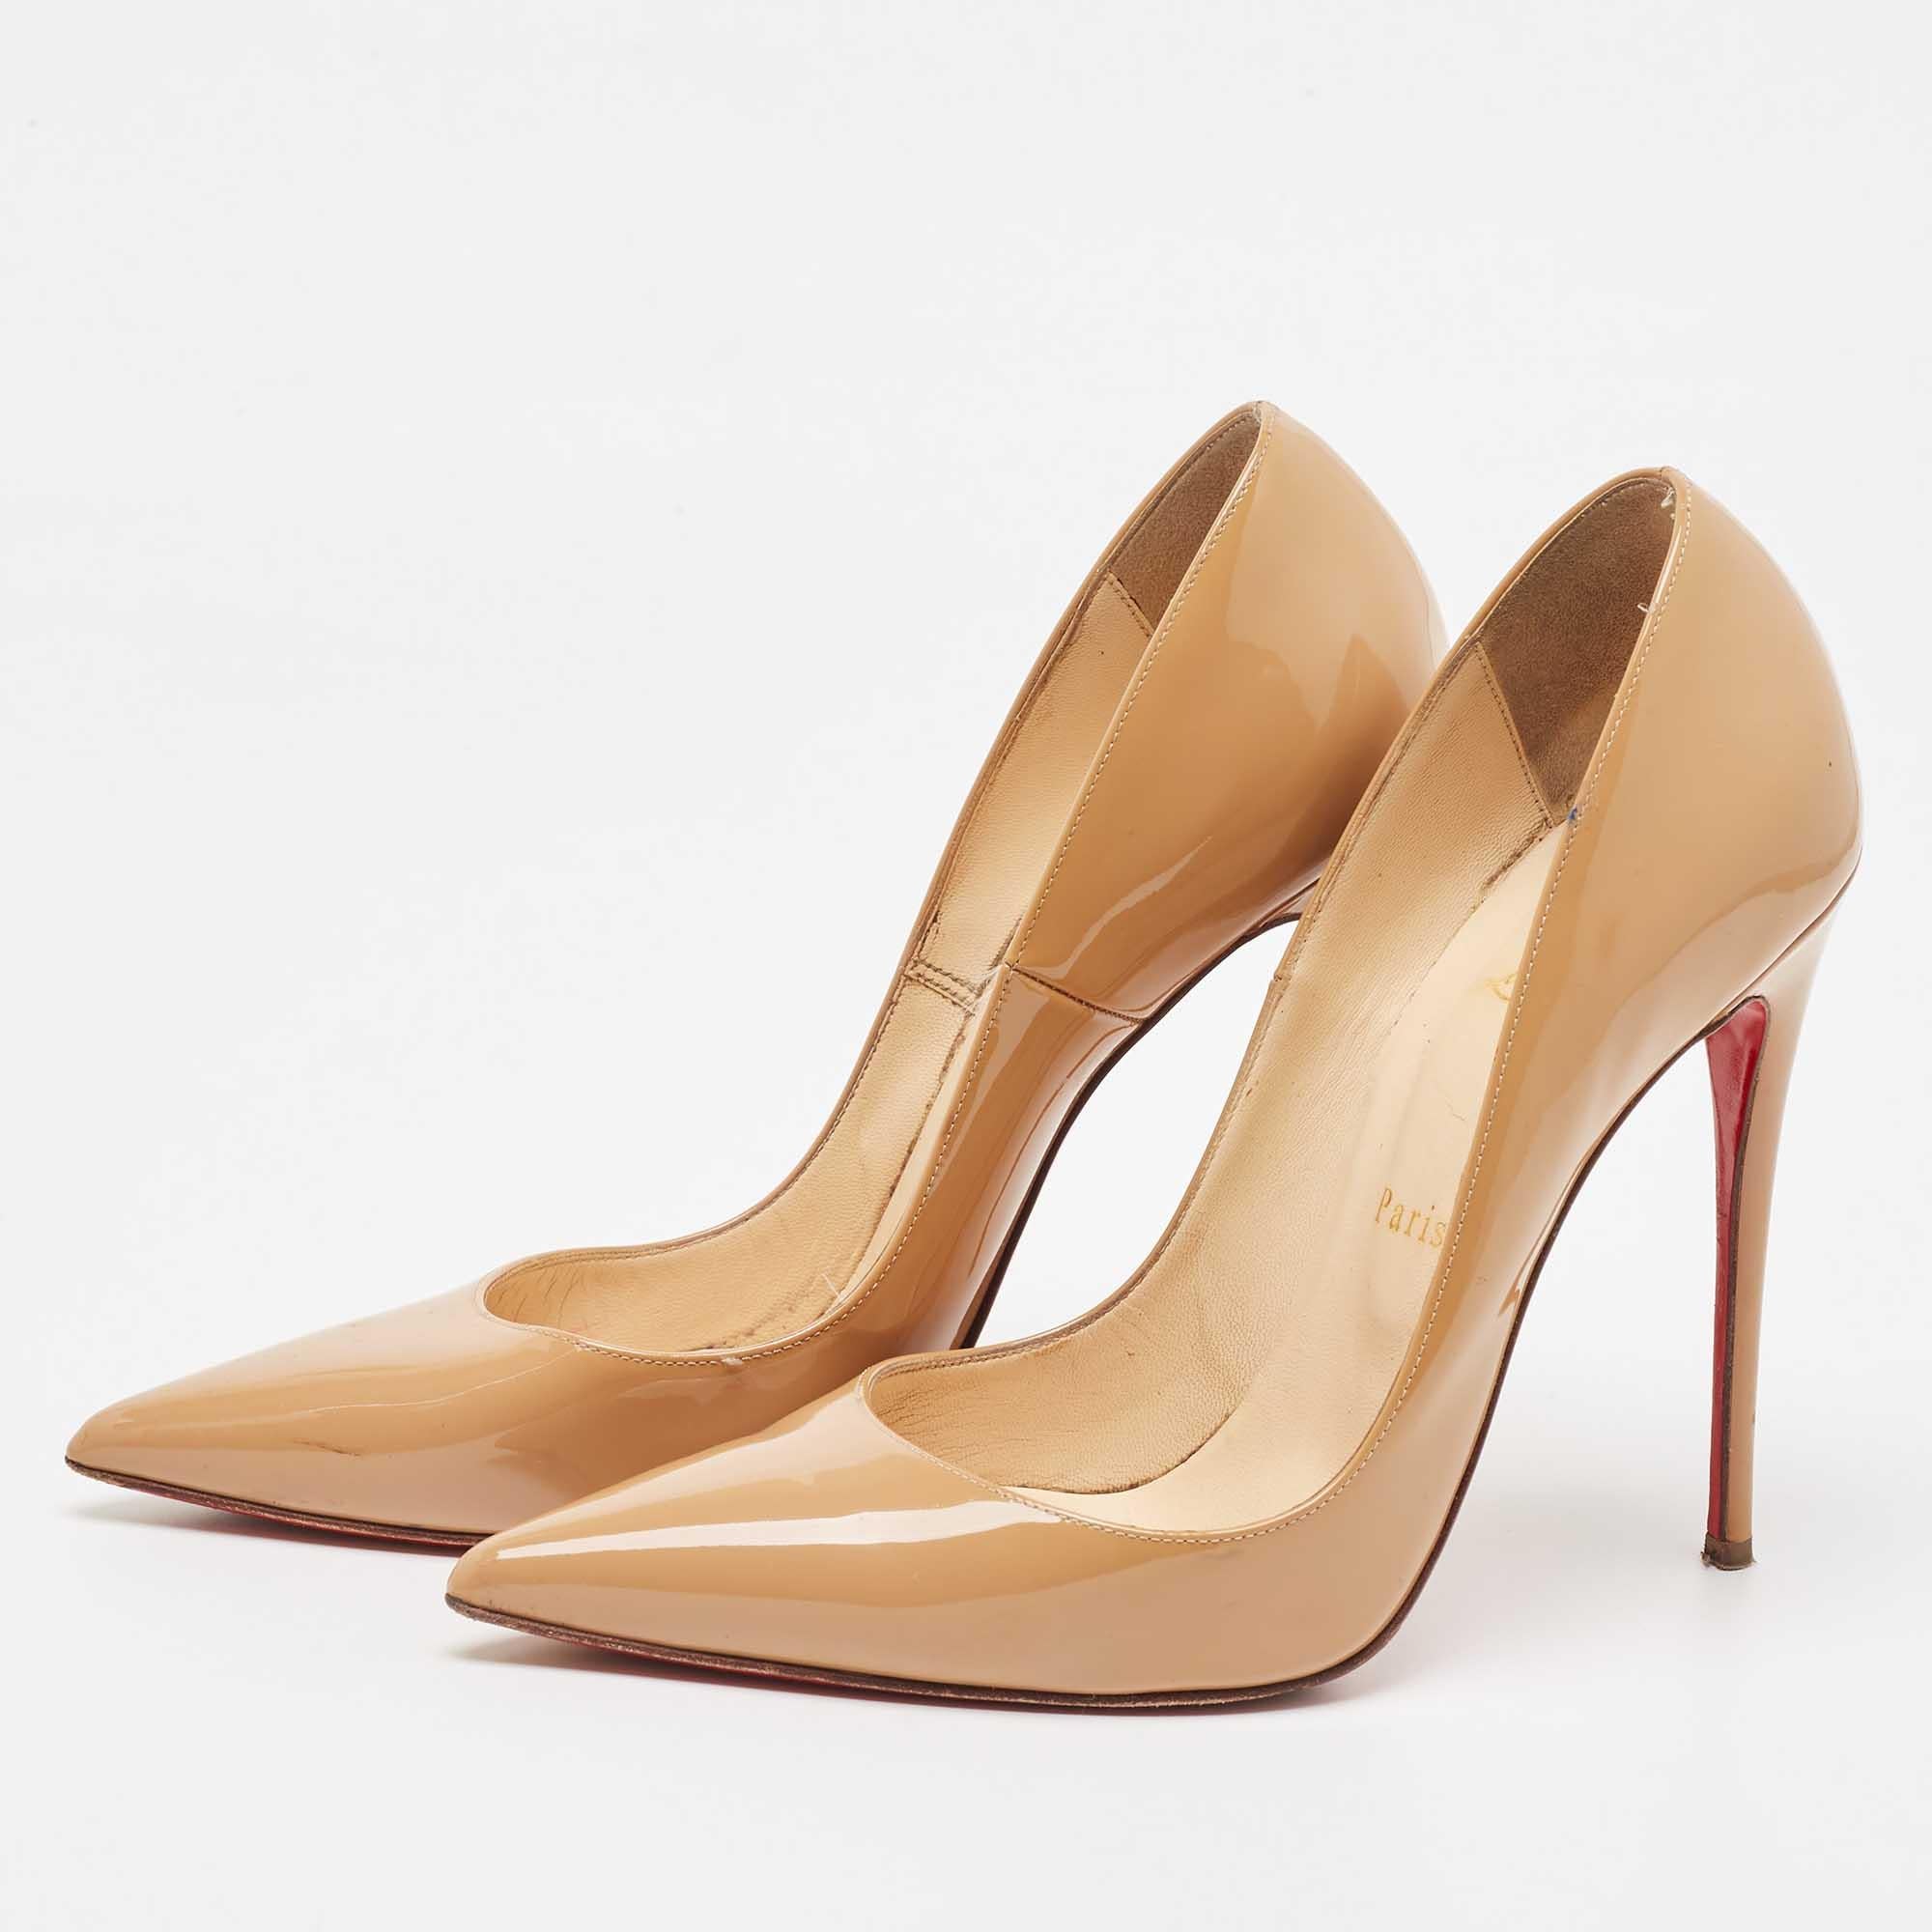 Wonderfully crafted shoes added with notable elements to fit well and pair perfectly with all your plans. Make these Christian Louboutin So Kate pumps yours today!

